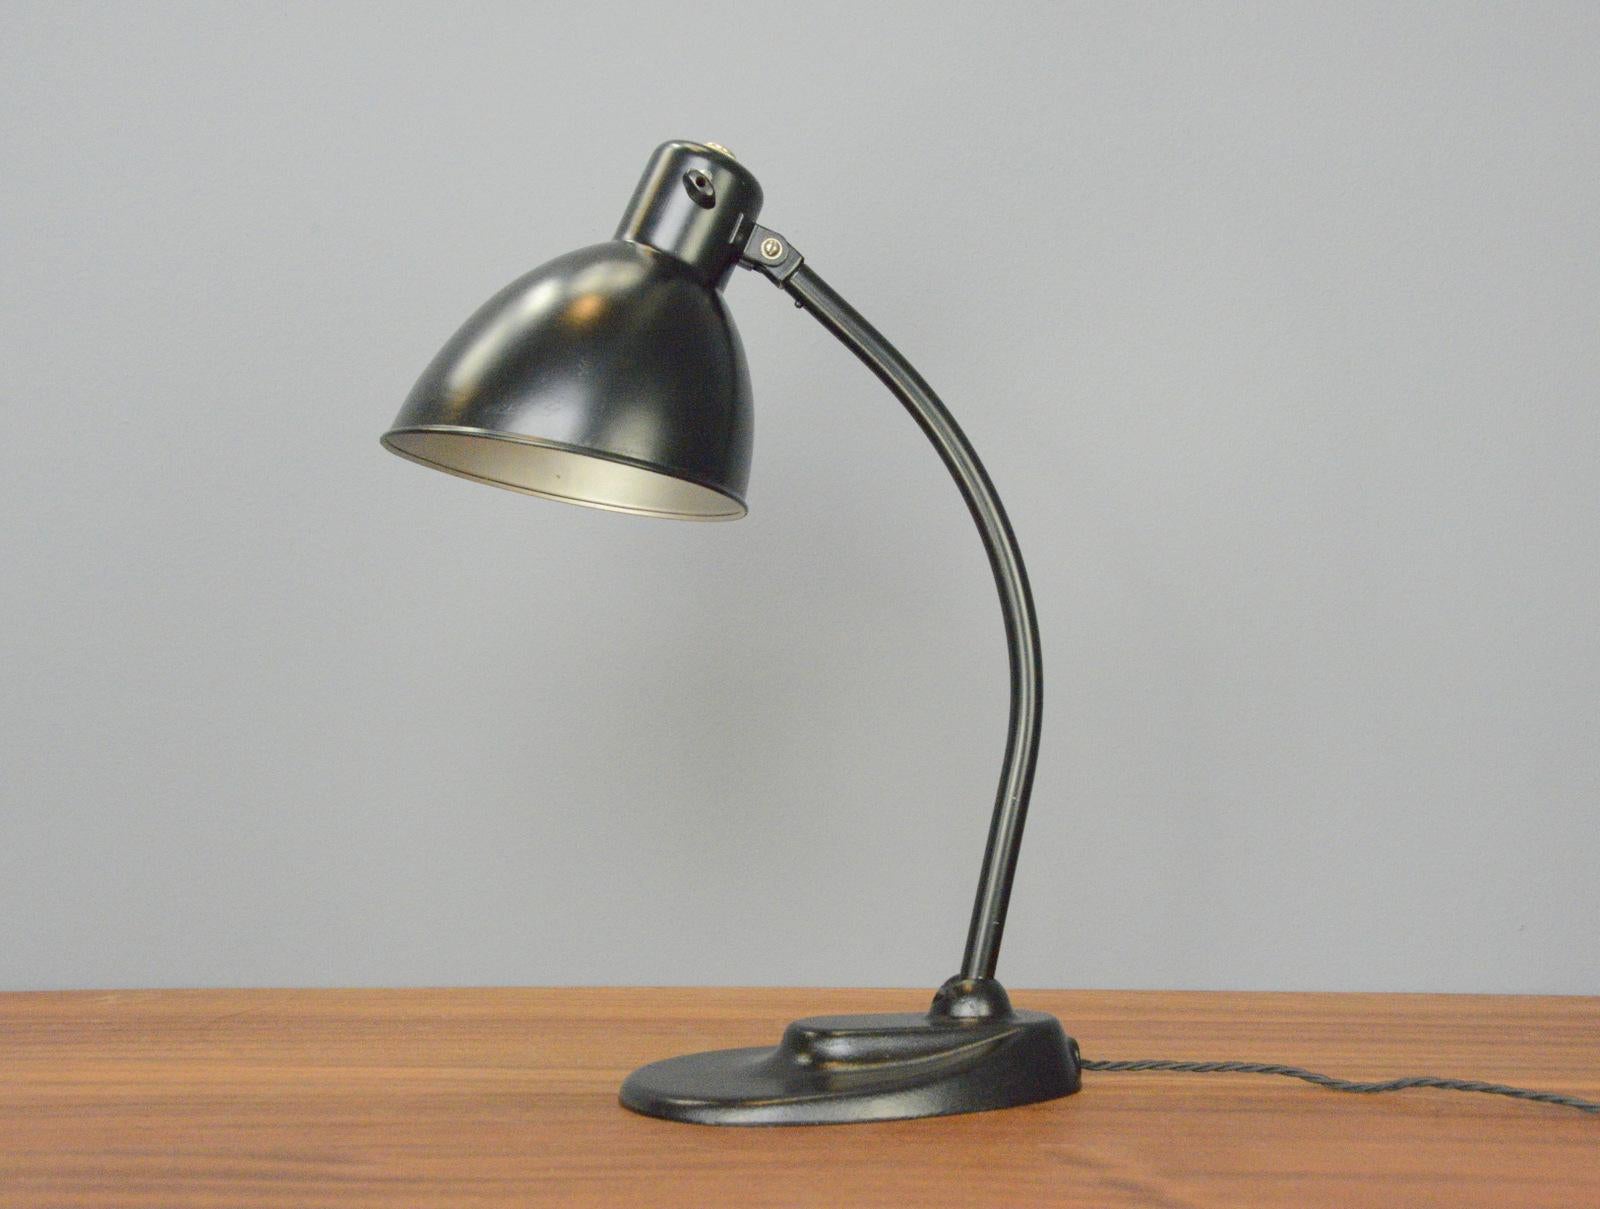 Model 999 Kandem desk lamp Circa 1930s

- Cast iron base
- Angled steel shade
- Articulated arm and shade
- Original on/off switch on the shade
- Model 999
- Produced by Korting and Mathiesen, Leipzig
- German ~ 1930s
- 49cm tall x 14cm